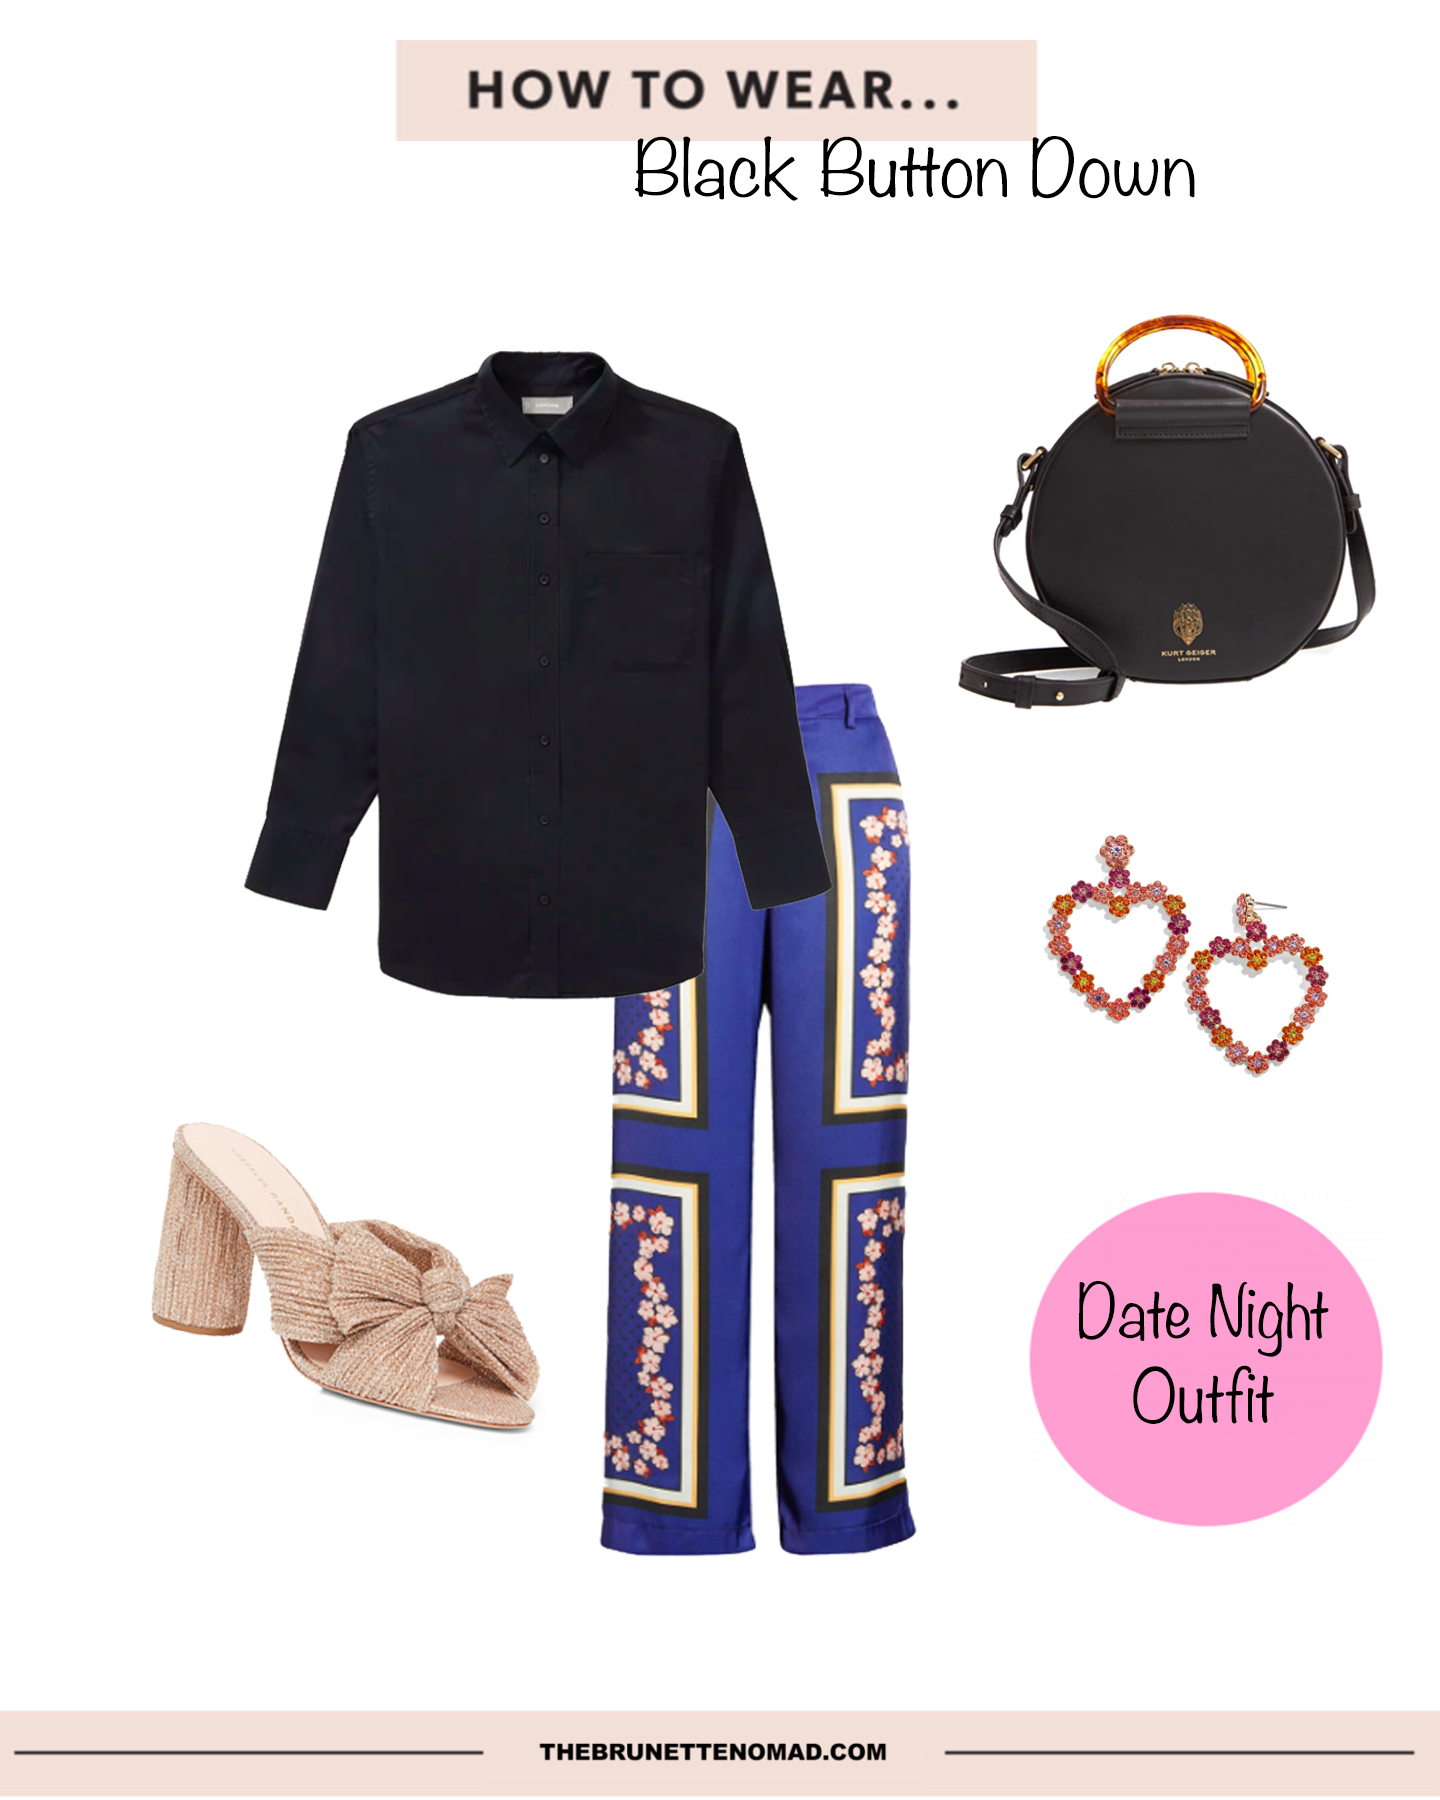 how to style black button down - date night outfit